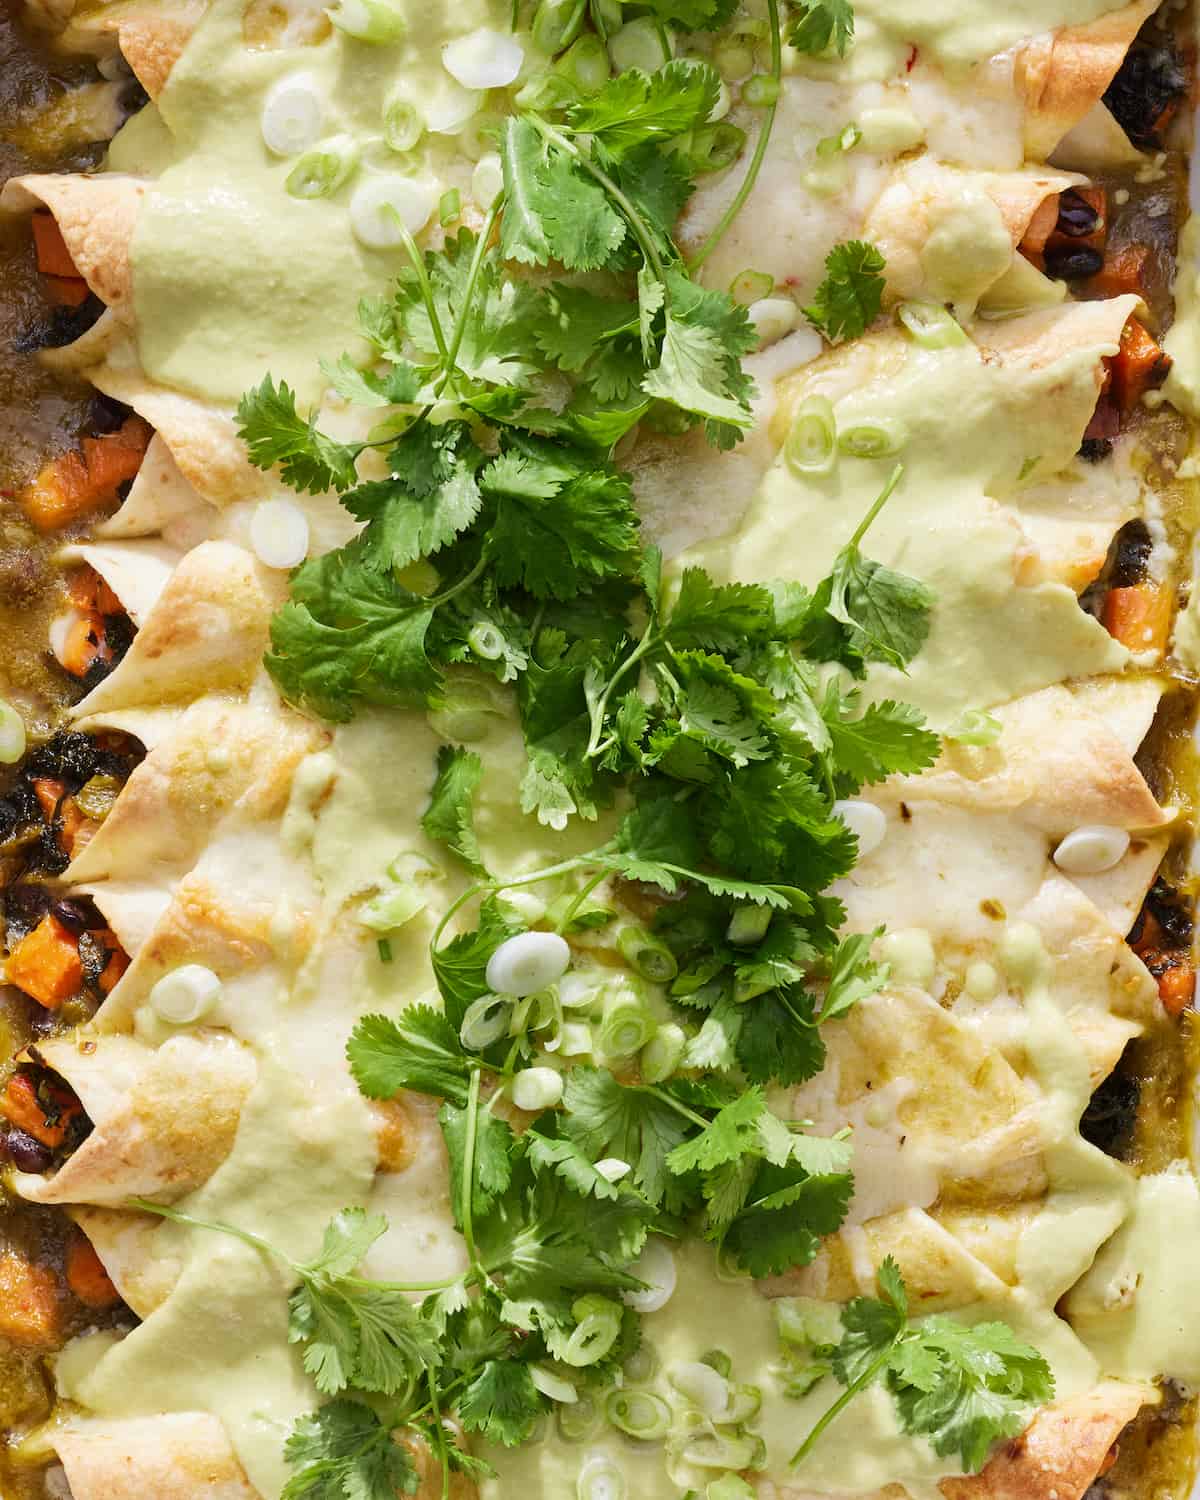 Close-up shot of vegetarian enchiladas with sweet potato kale and black beans garnished with coriander and scallions.